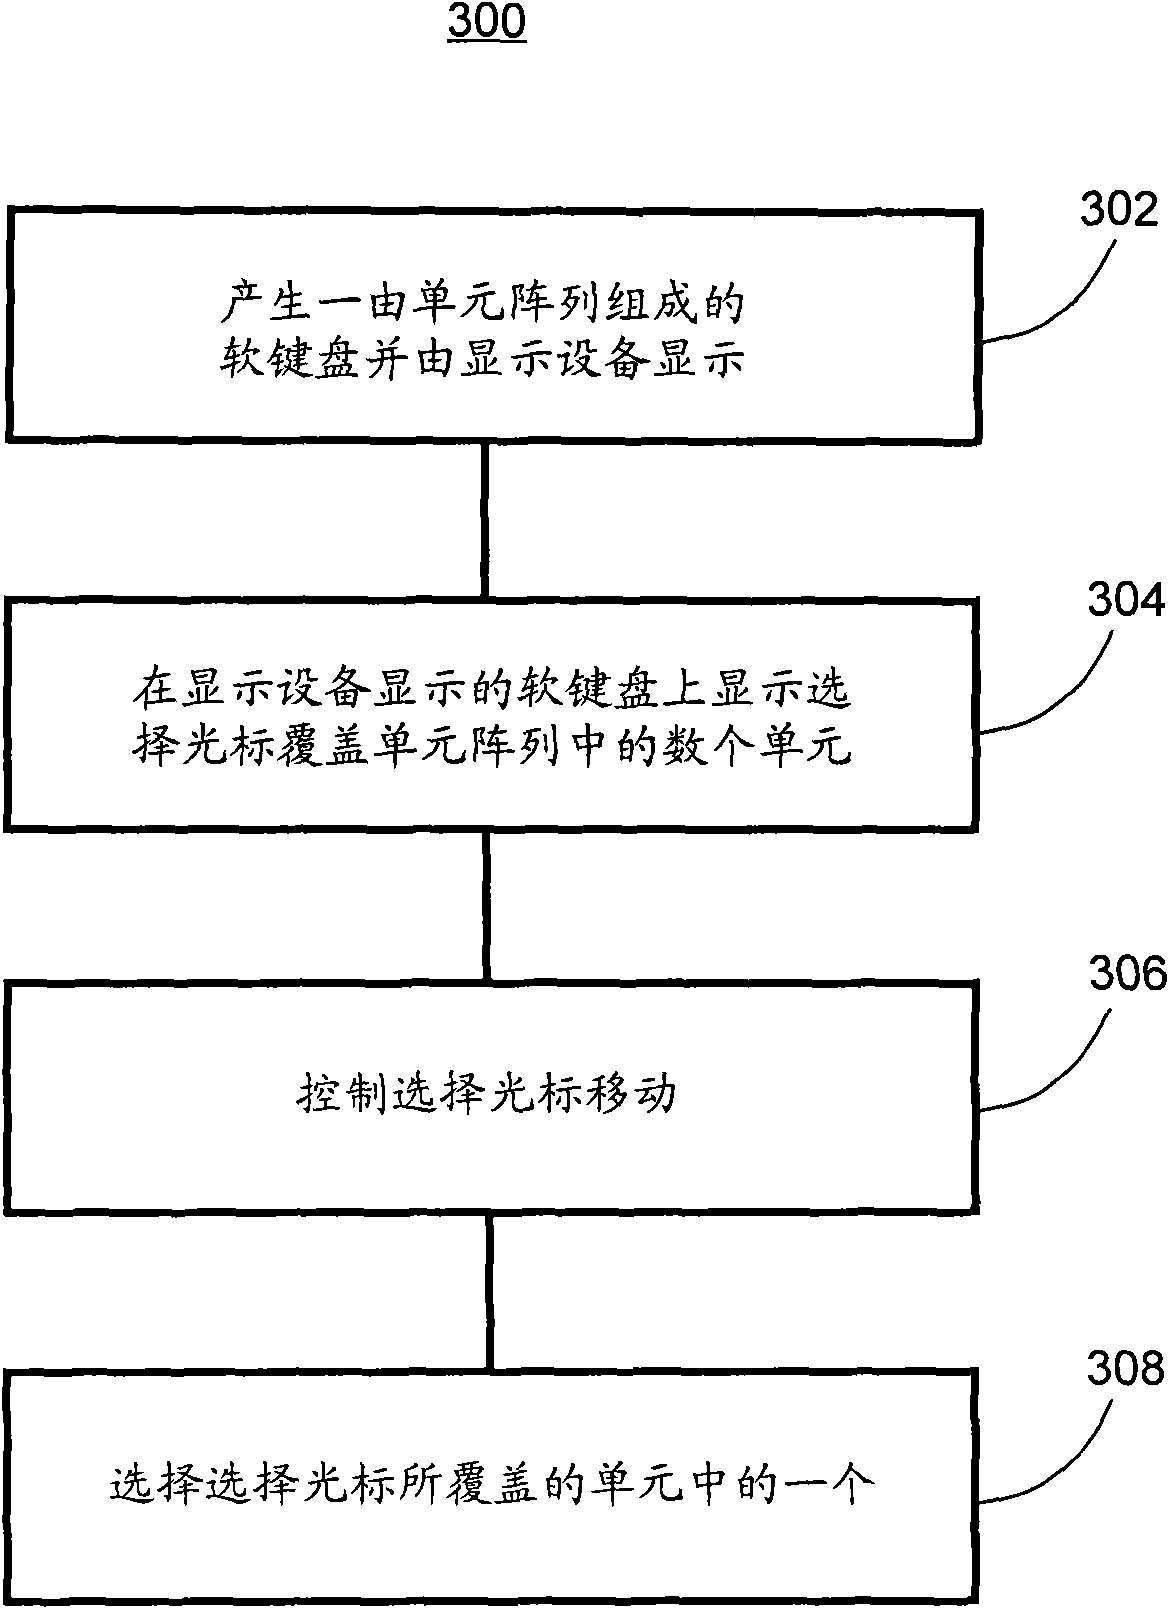 Single-hand input method and remote controller